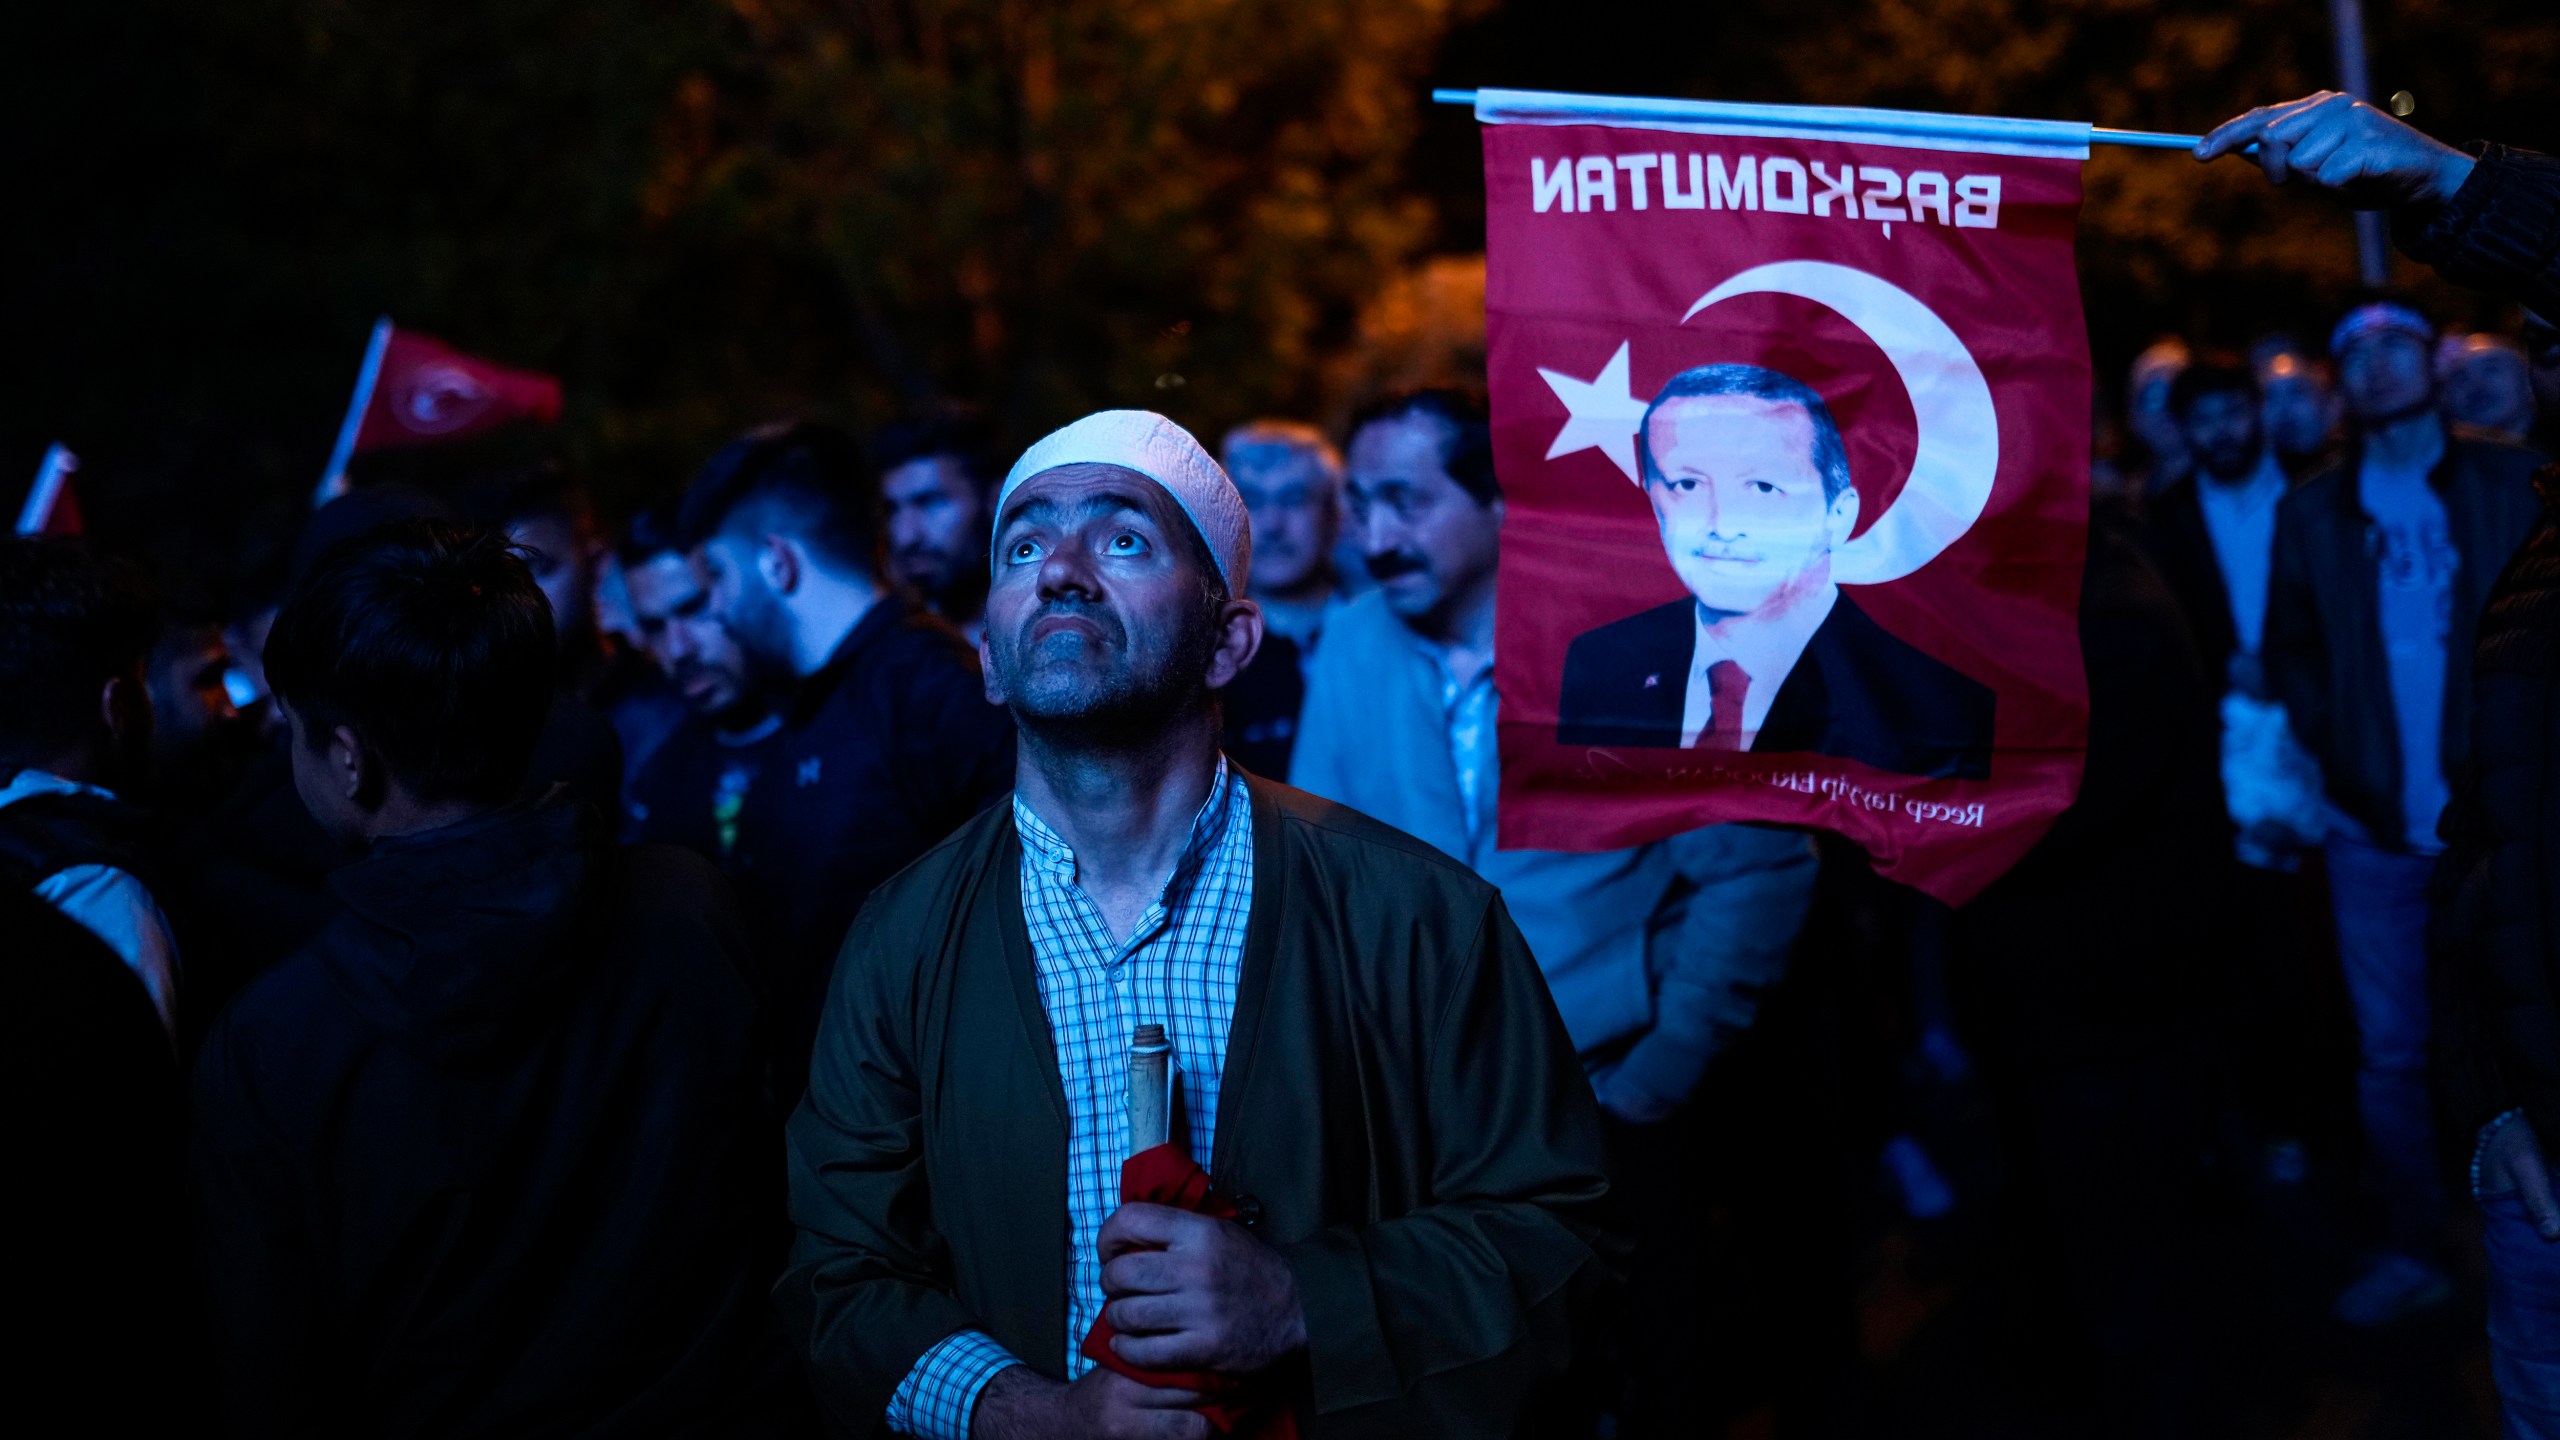 Supporters of Turkish President Recep Tayyip Erdogan watch news on a giant screen outside AKP (Justice and Development Party) headquarters in Istanbul, Turkey, Sunday, May 14, 2023. More than 64 million people, including 3.4 million overseas voters, were eligible to vote. (AP Photo/Francisco Seco)